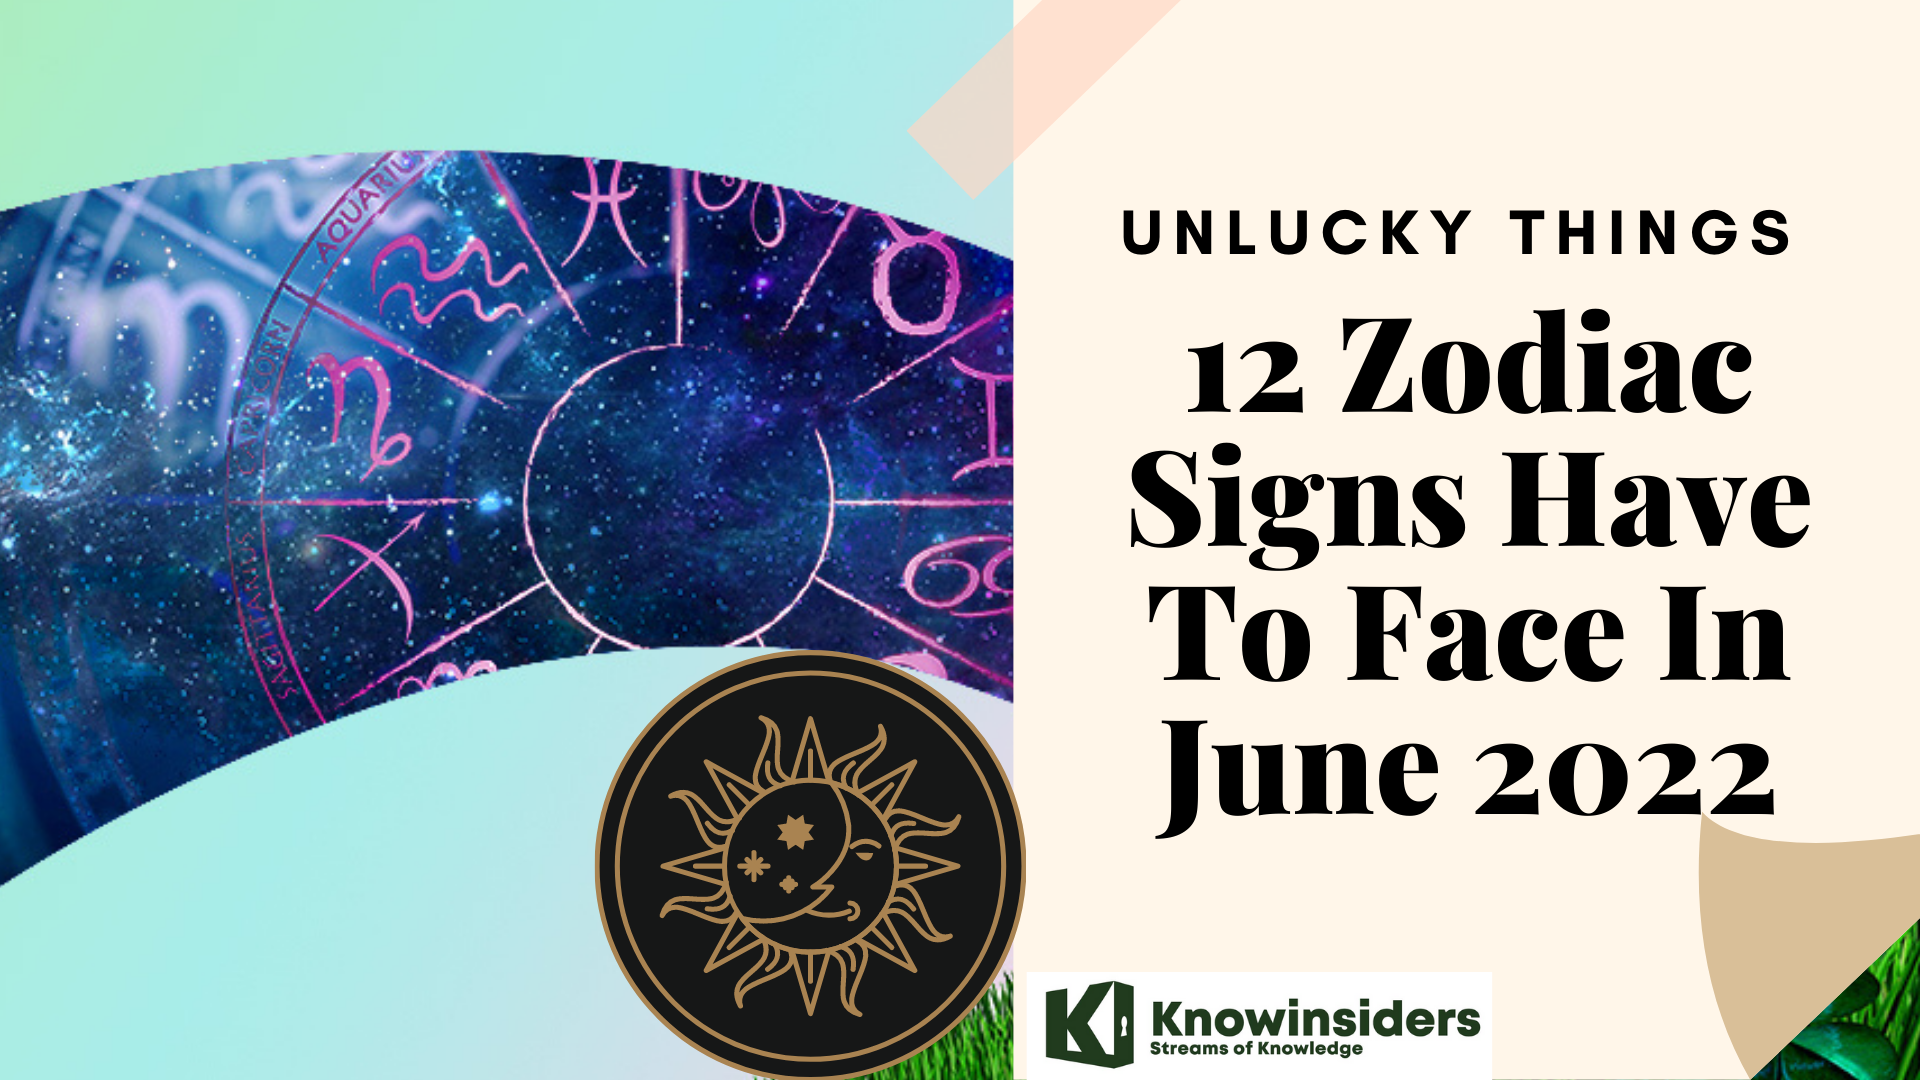 Bad Luck In June 2022 That 12 Zodiac Signs Have to Avoid